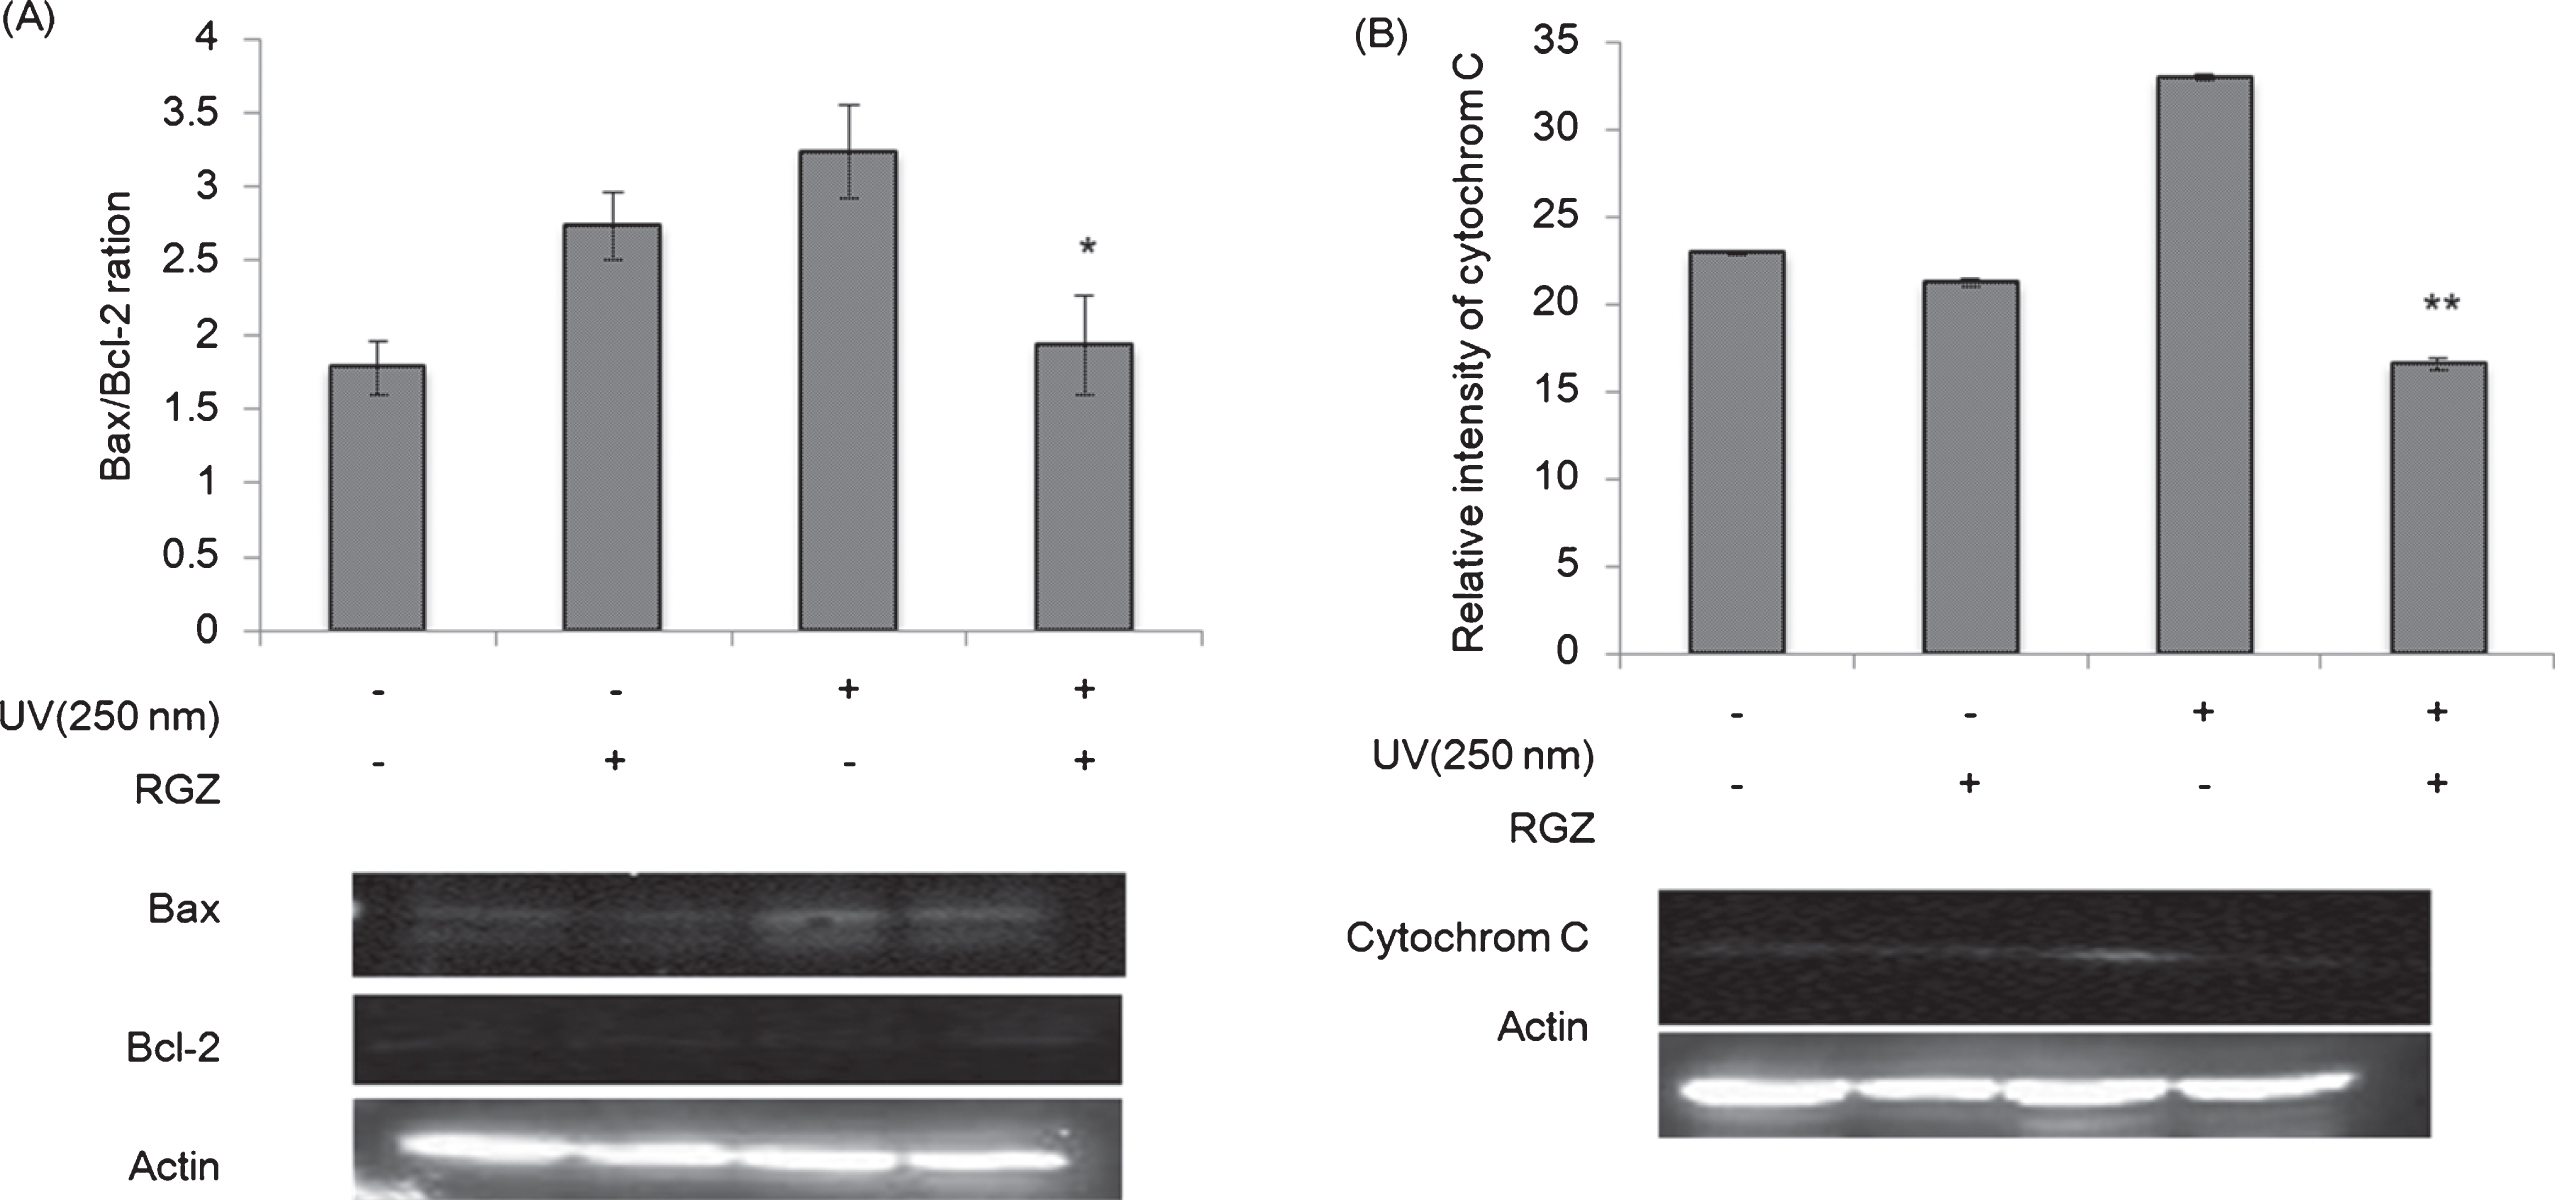 Western blot analyses of Bax/Bcl-2 ratio (A) and cytochrome C (B) in NHEK cells treated with and without RGZ under the UV irradiation (250 nm). Asterisk denotes significant difference *:p < 0.05, **:p < 0.01 as compared with the NHEK cells treated with UV-only treated group. RGZ extraction condition was followed condition 2 of Table 1. Error bars indicate SEM (n = 3).